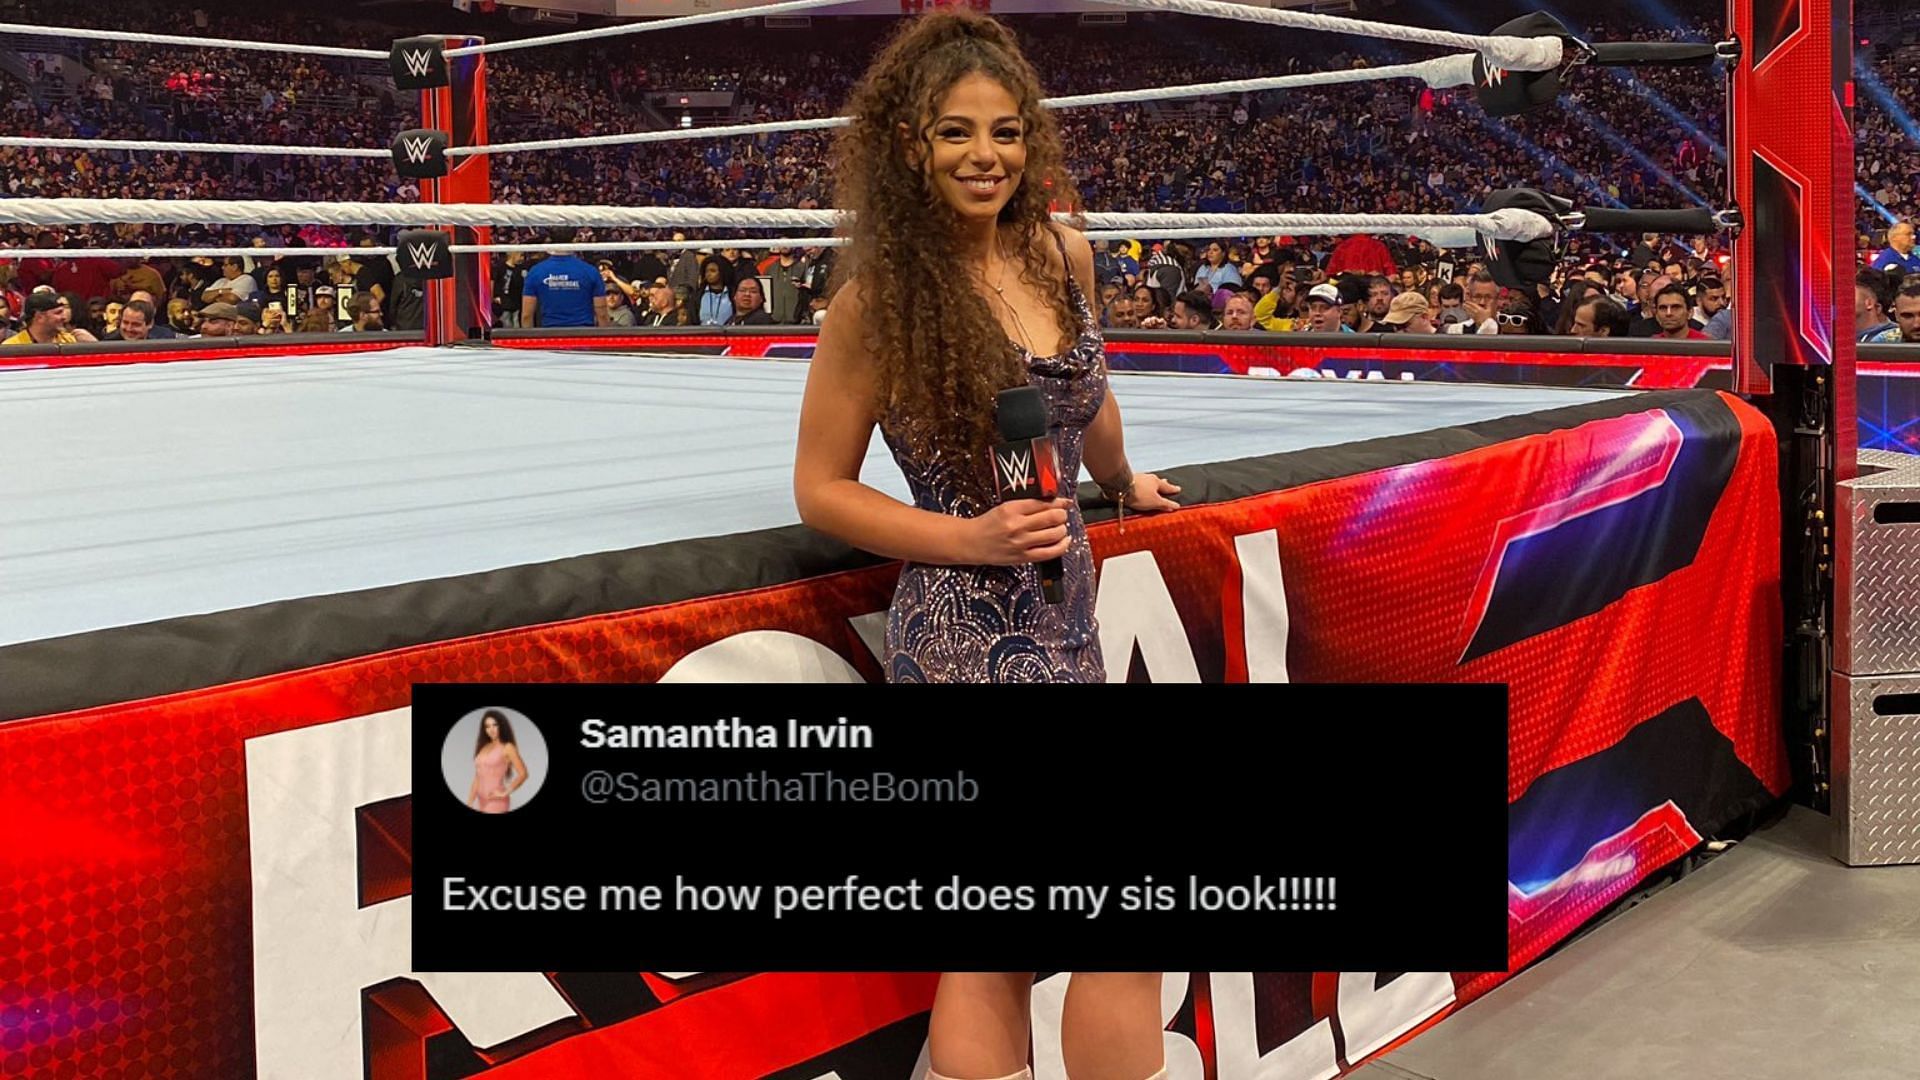 Samantha Irvin is an announcer in WWE